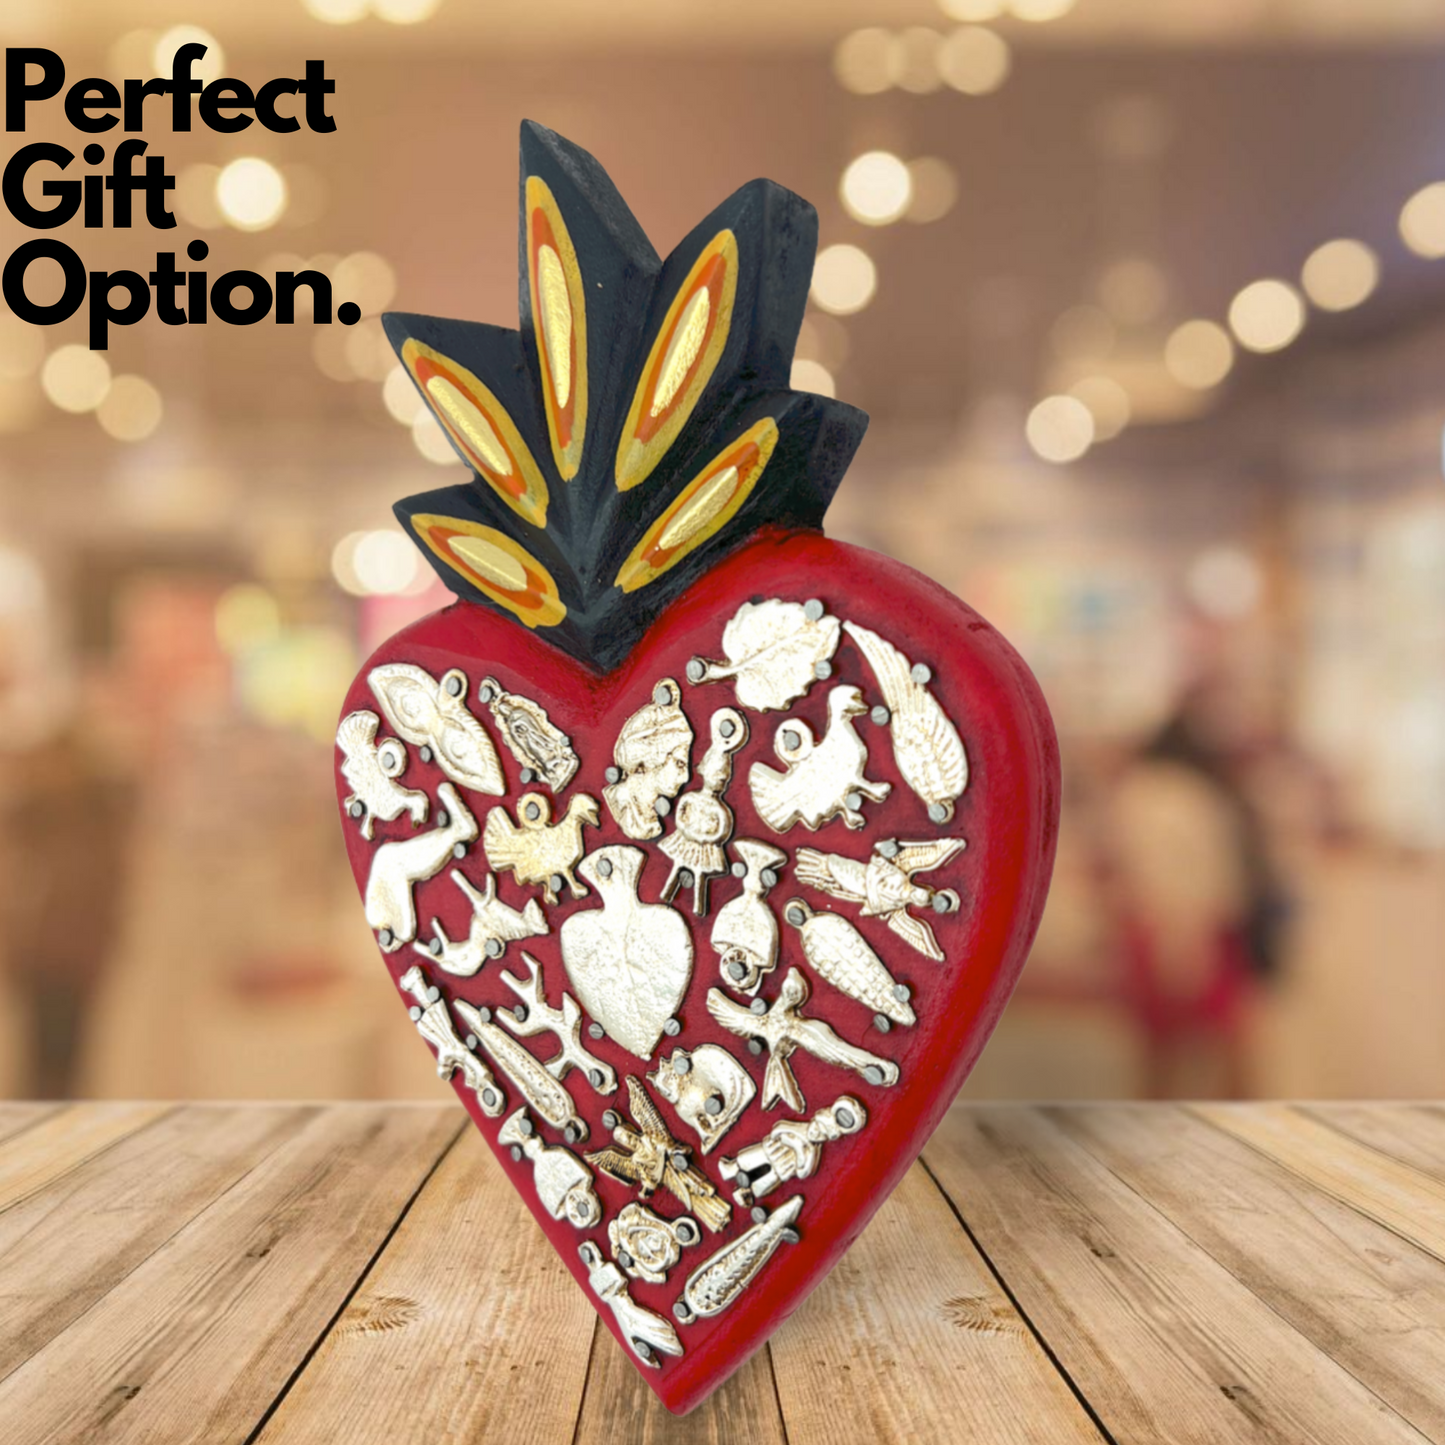 perfect gift option Casa Fiesta Designs' Ex Voto Sacred Heart - Handcrafted and Hand-painted Mexican Milagros Wall Decor.